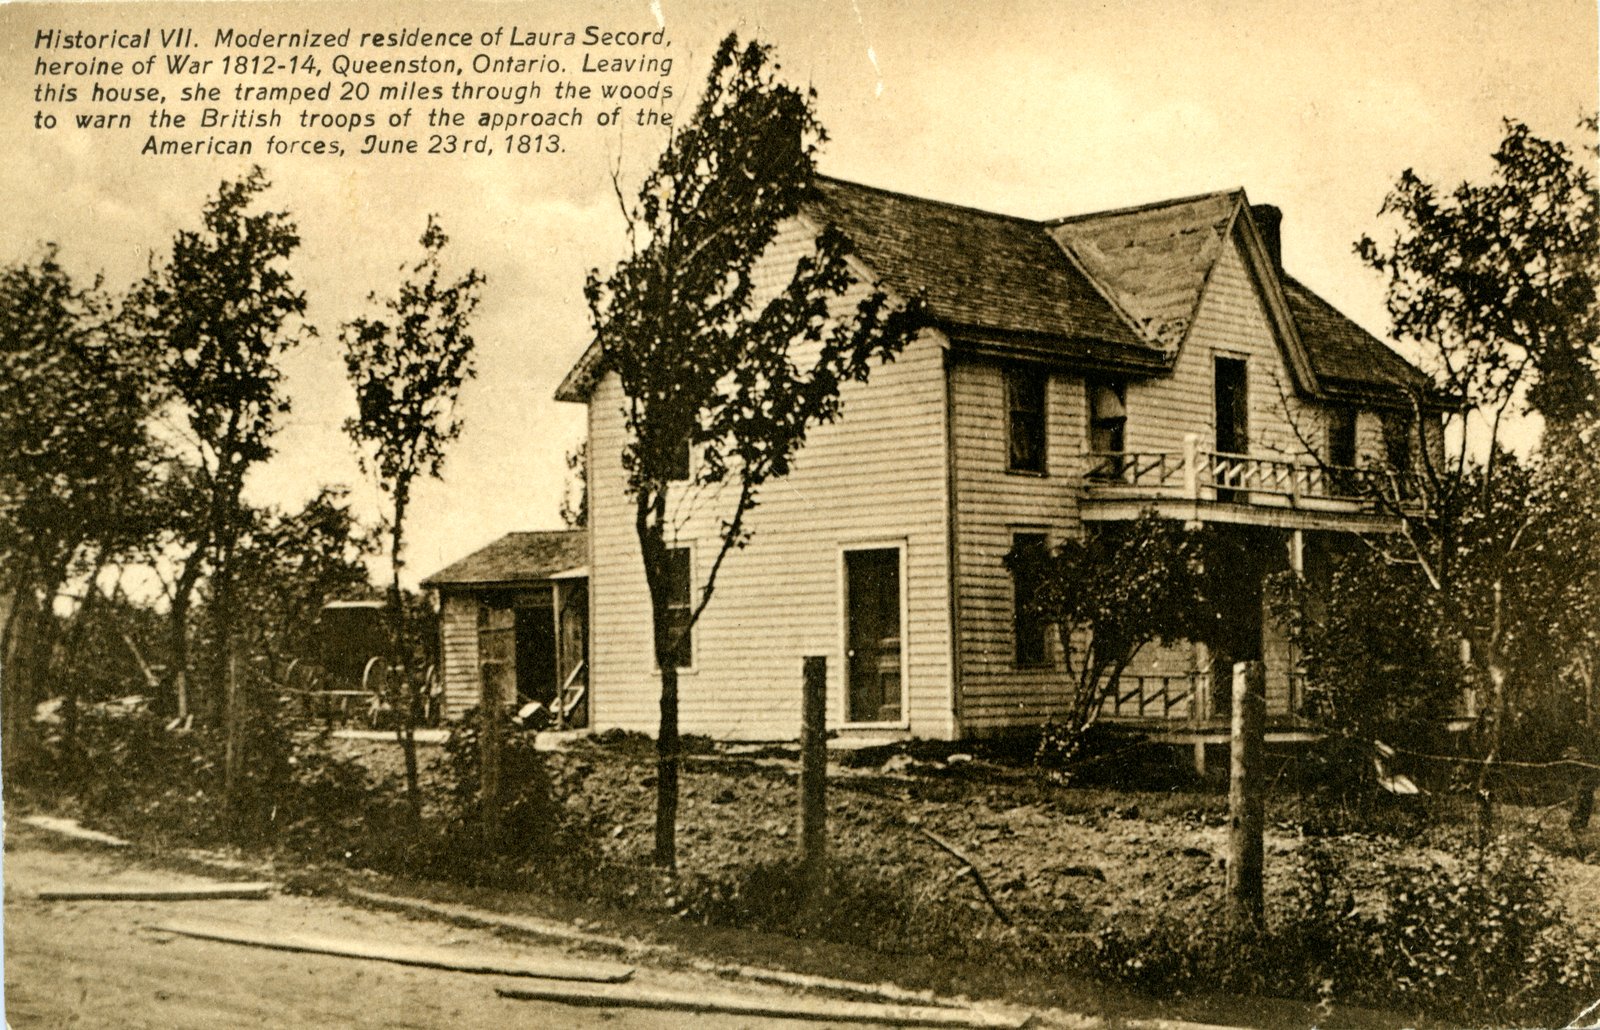 Modernized residence of Laura Secord, heroine of War 1812-14, Queenston, Ontario. Courtesy the Niagara-on-the-Lake Public Library.